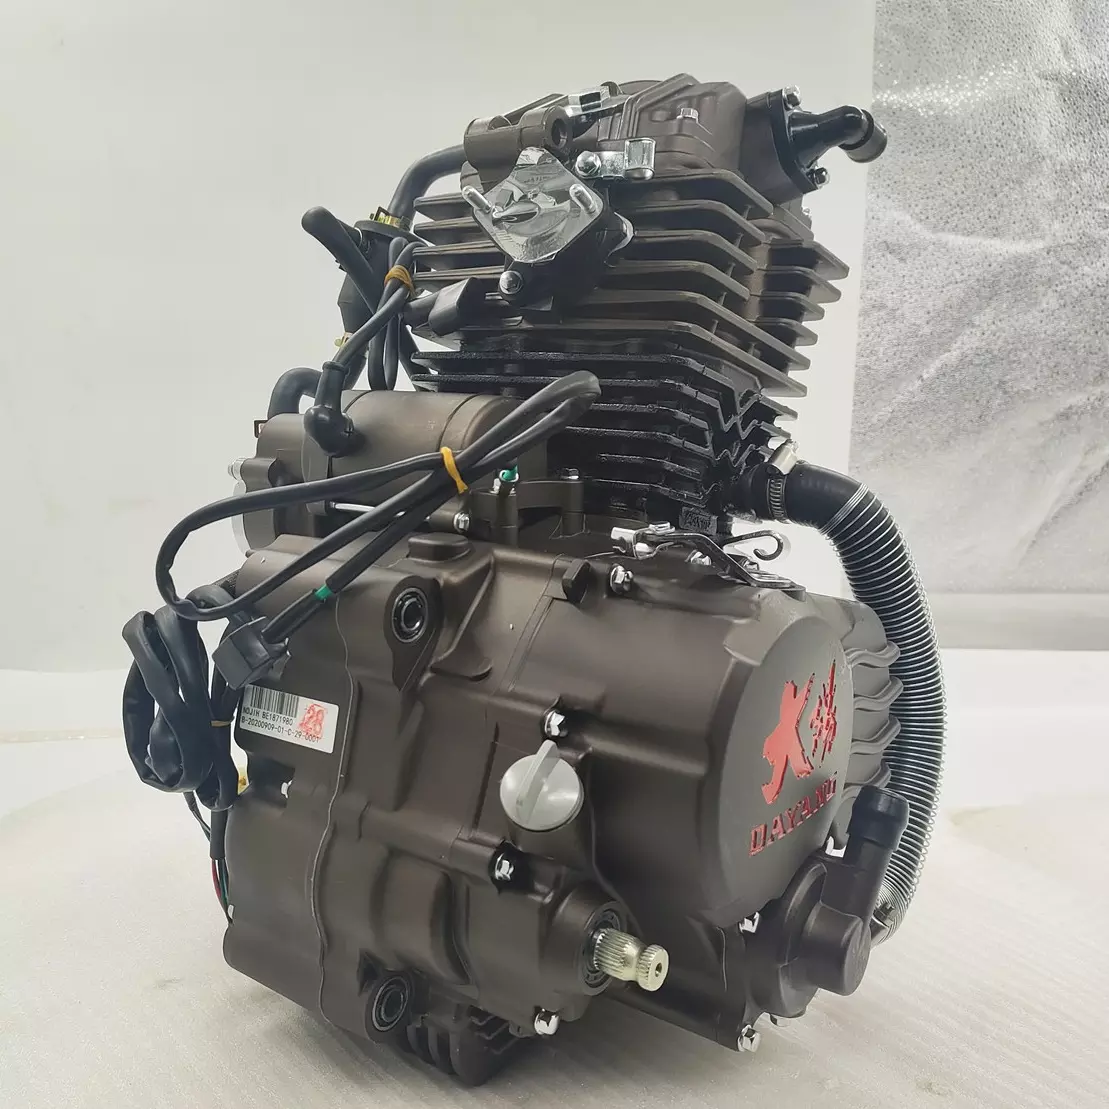 250CC DAYANG Motorcycle Engine Single Cylinder 4 Stroke Style Wolf water-cooled Method Origin Ignition CDI Start Place Kick